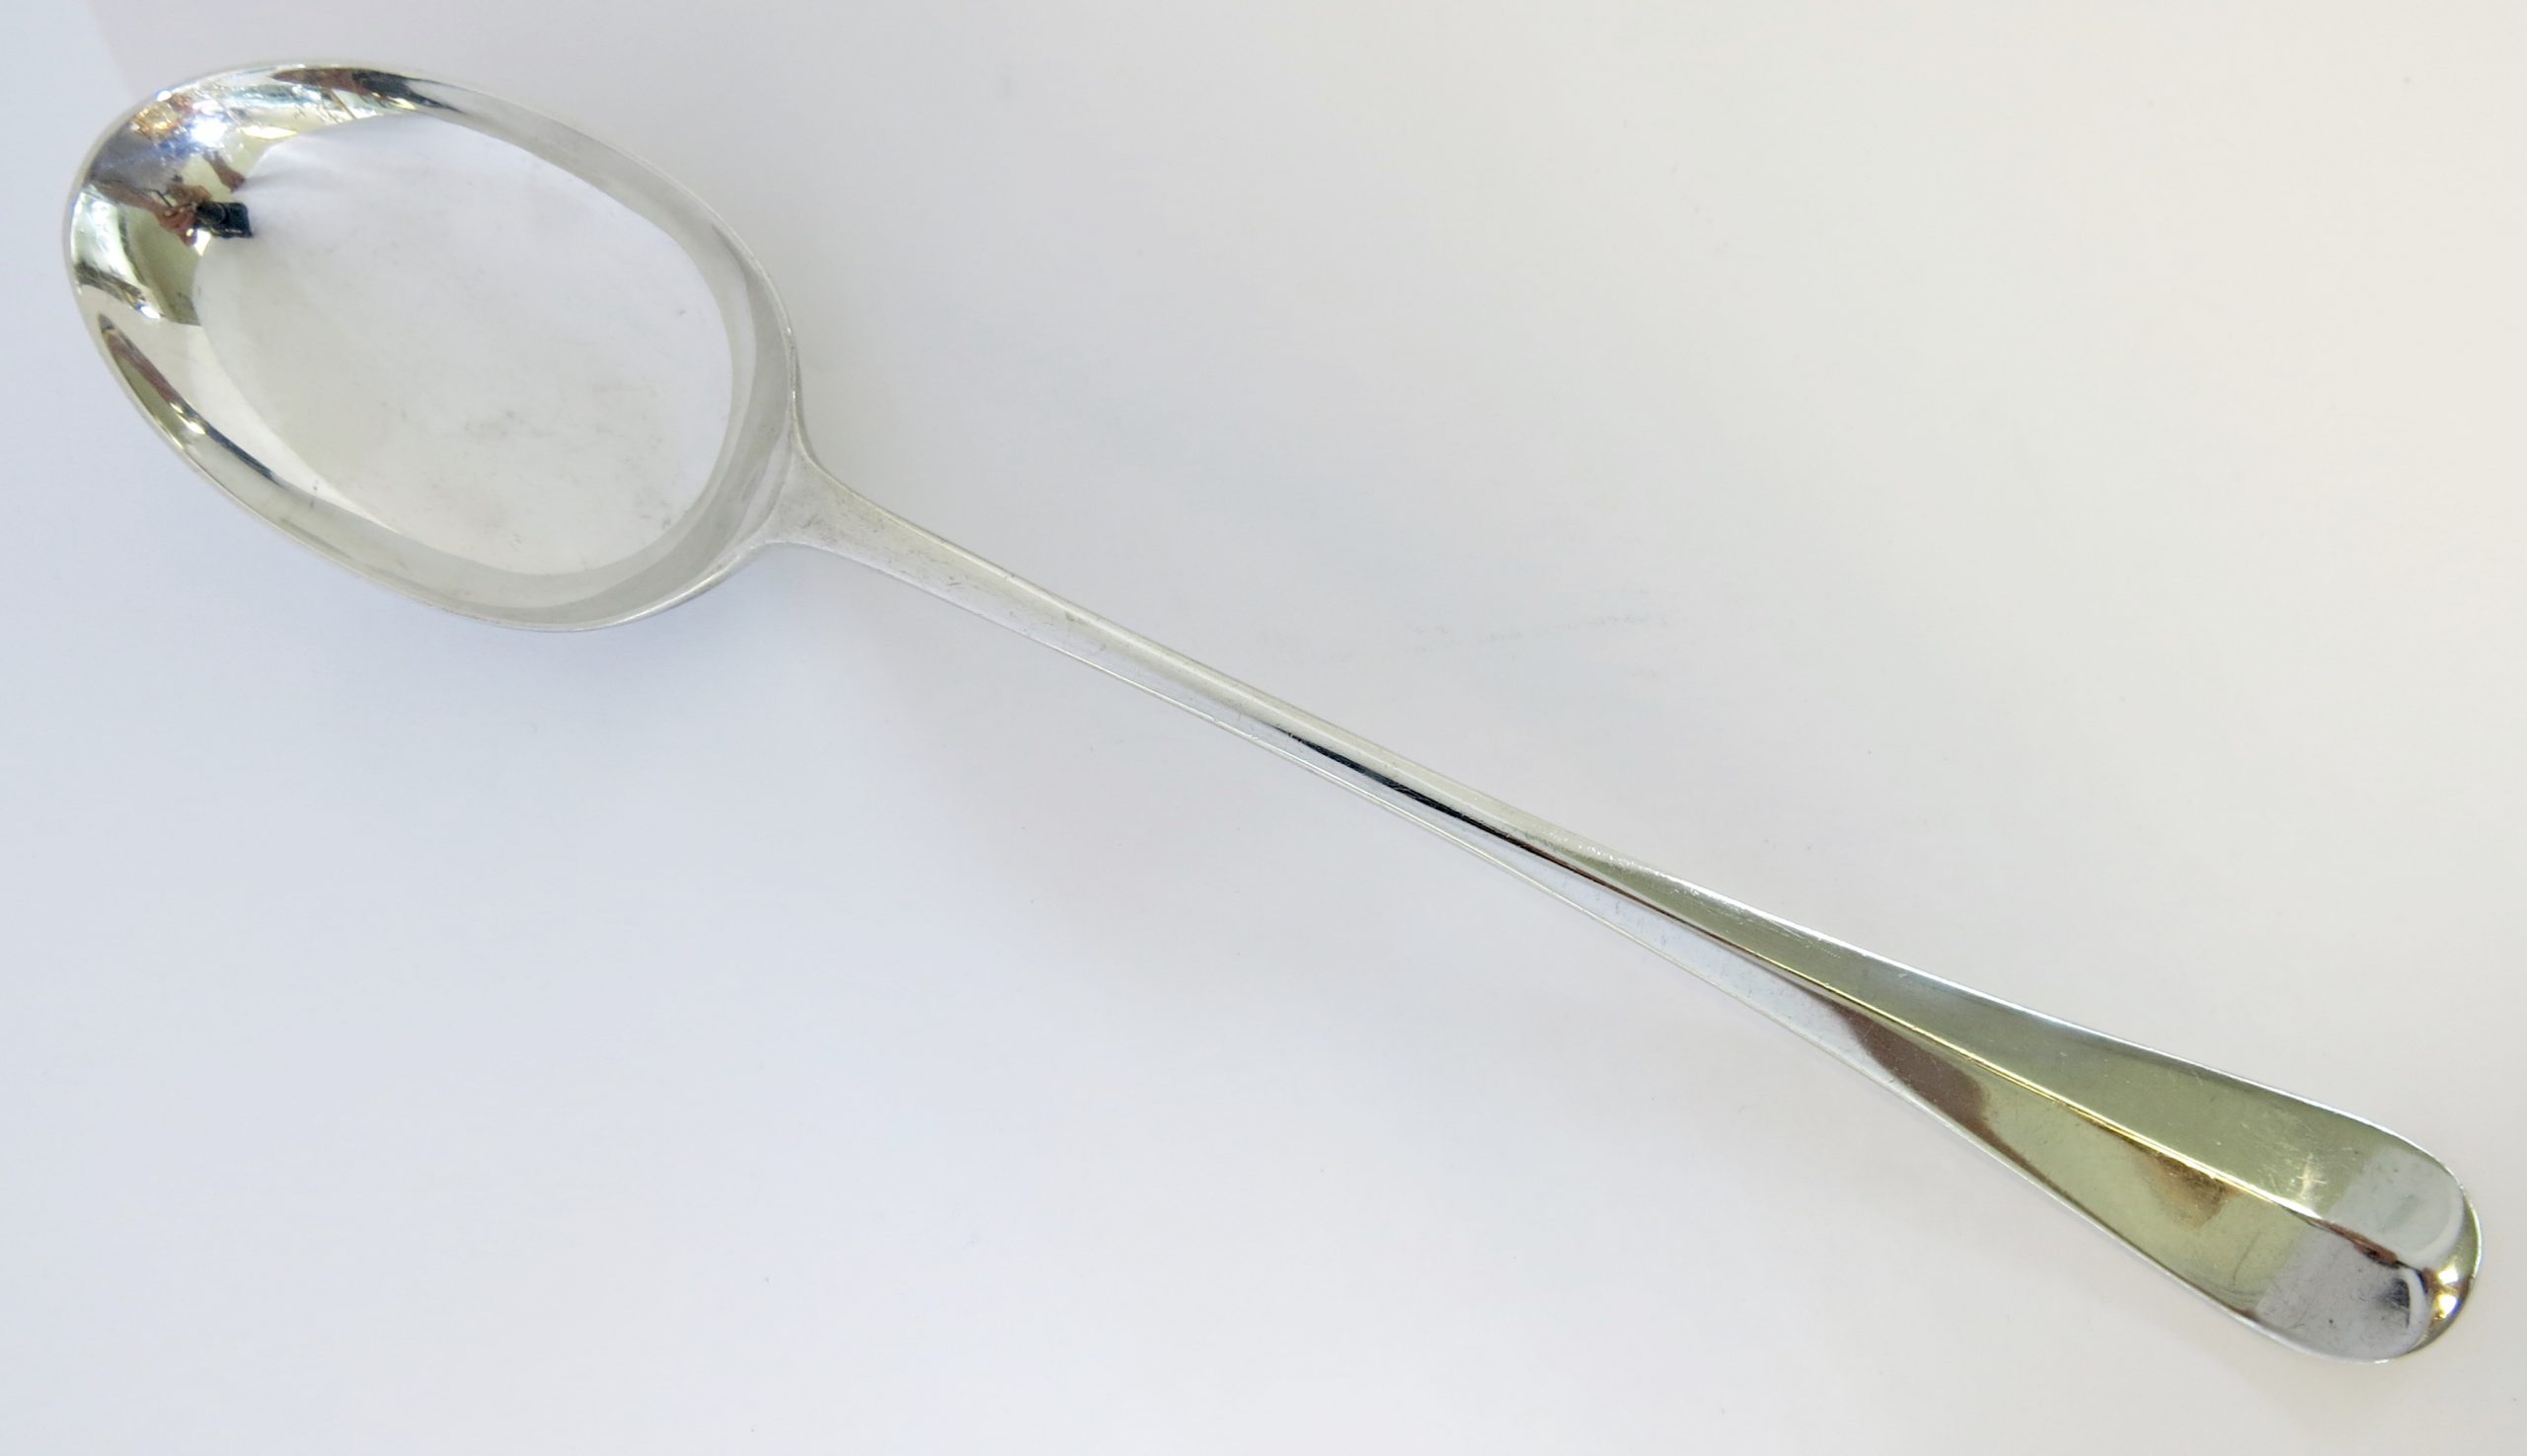 Queen Anne / Rattail Pattern Serving/Stuffing/Basting Spoon. English Sterling Silver